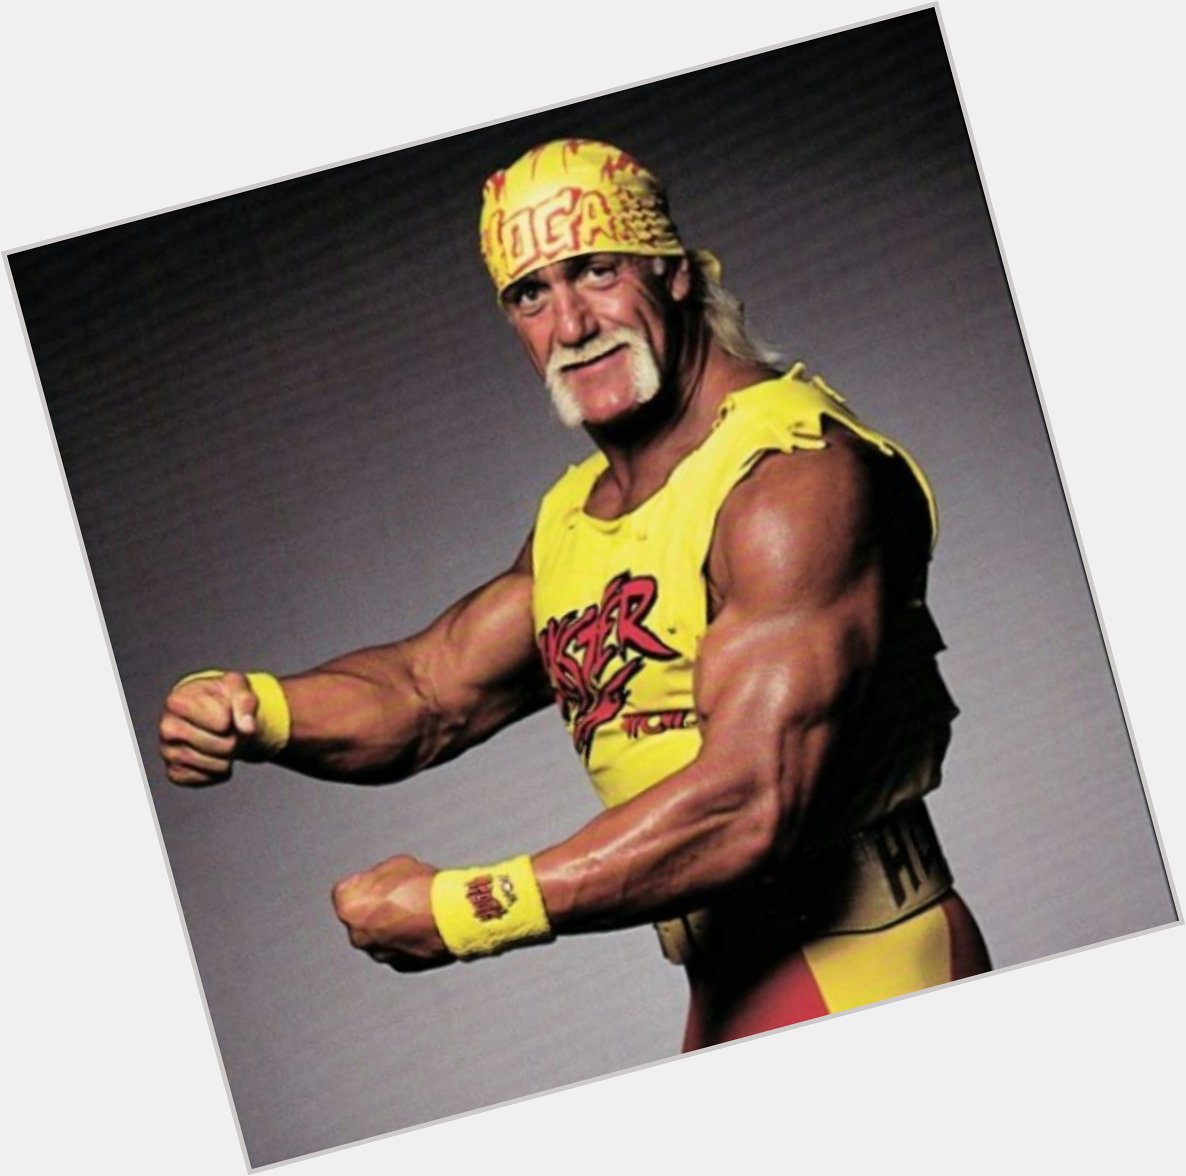 (Hulkamania\s Voice) WELL LET ME TELL YOU SOMETHING BROTHER! Happy 63rd Birthday To The Legendary Hulk Hogan      